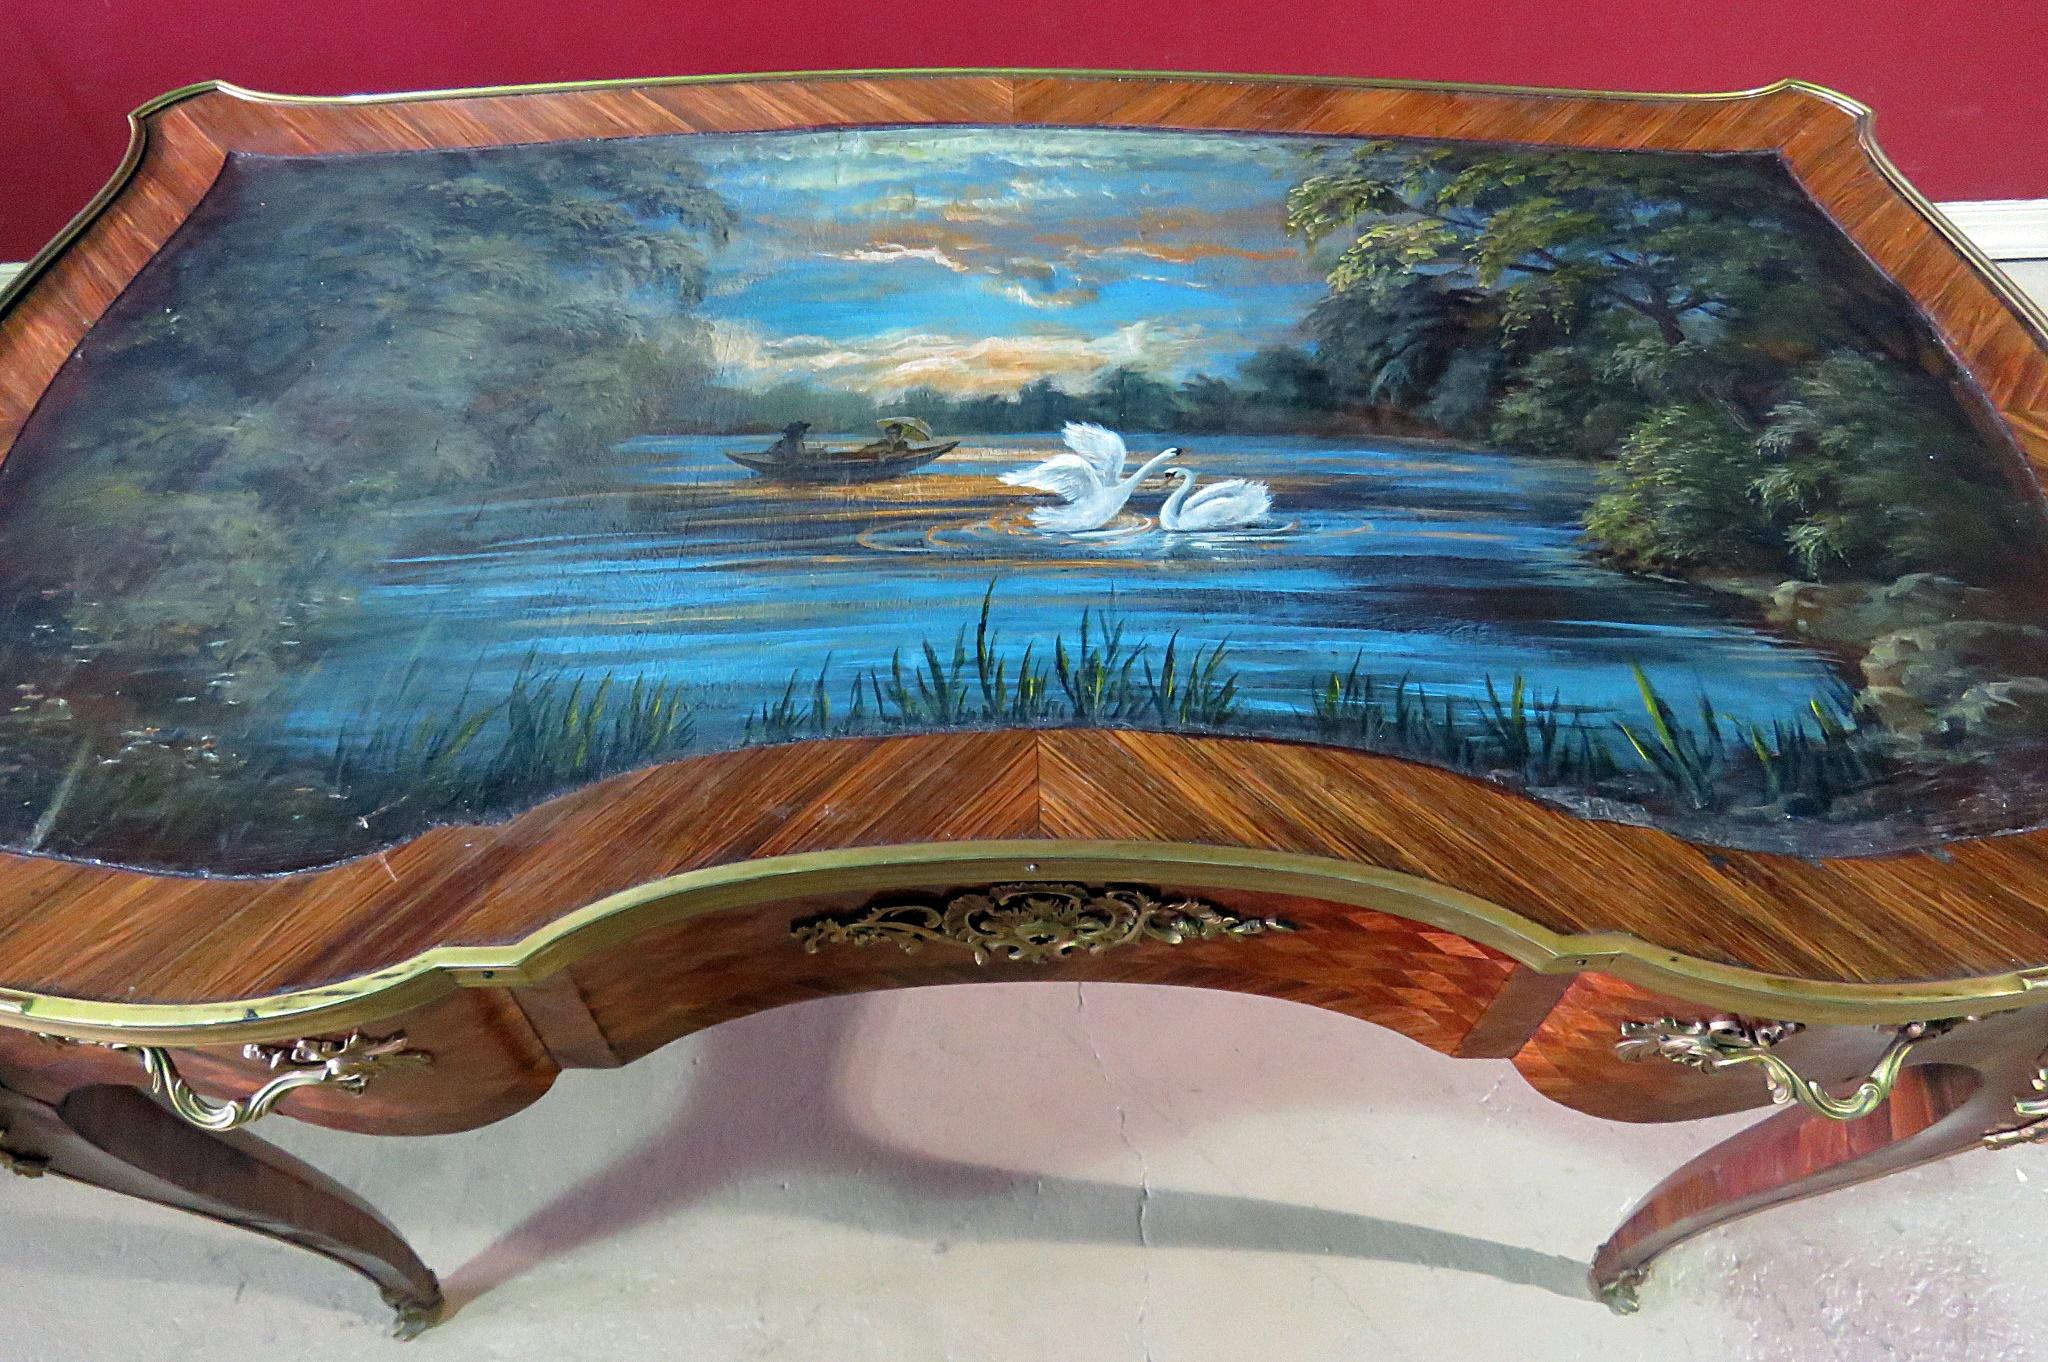 Regency style 1 drawer inlaid writing desk with a professionally hand-painted swan scene on a pond at night on a leather top and superb brass mounts. This desk was just professionally painted and shows no wear to the painted surface. It's a unique